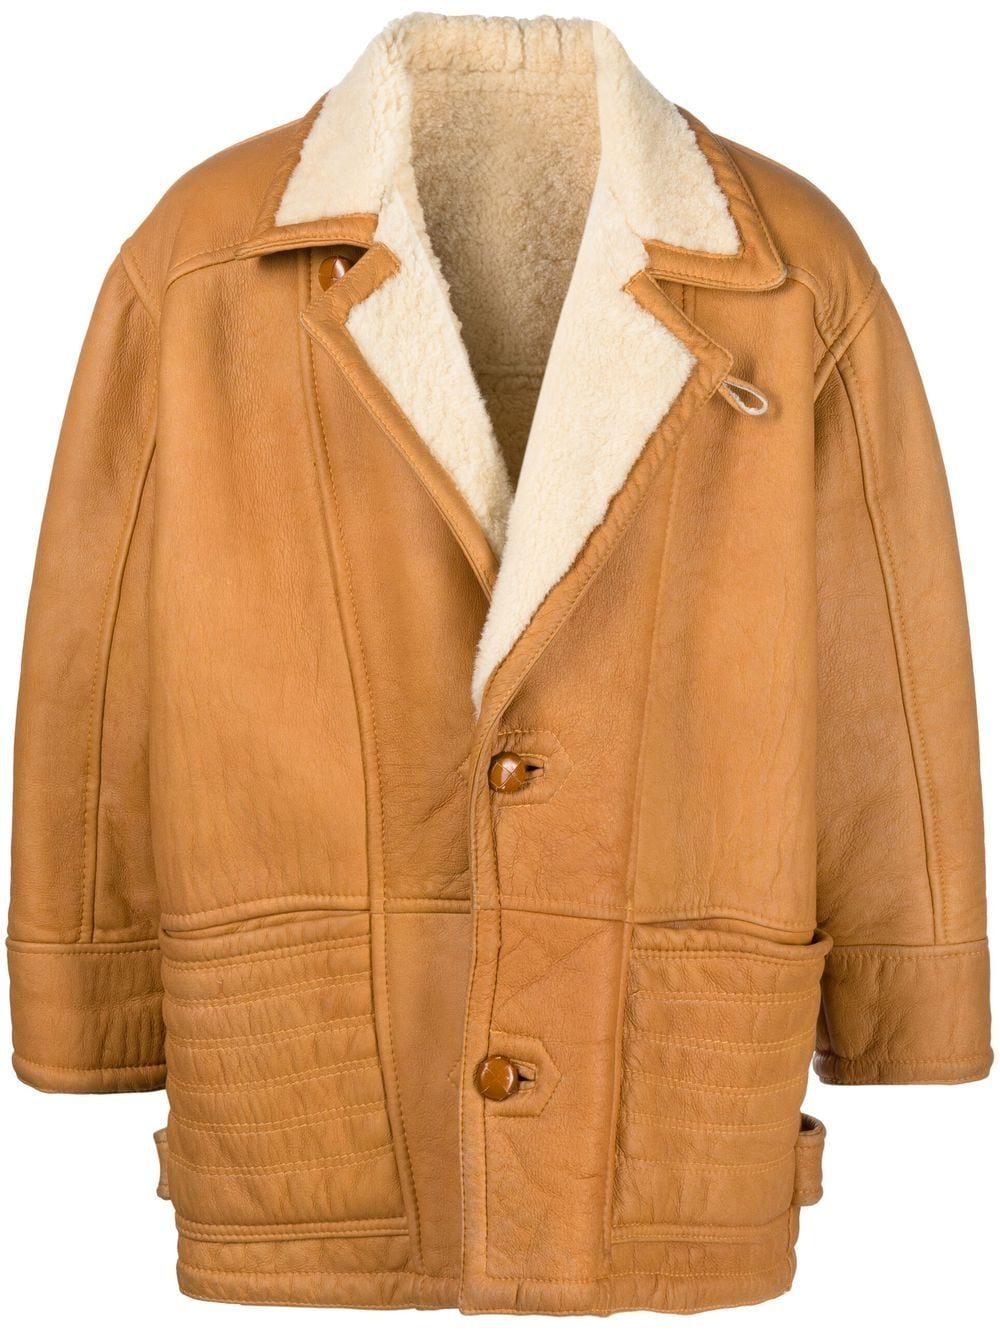 Image 1 of A.N.G.E.L.O. Vintage Cult 1980s shearling-lined leather coat